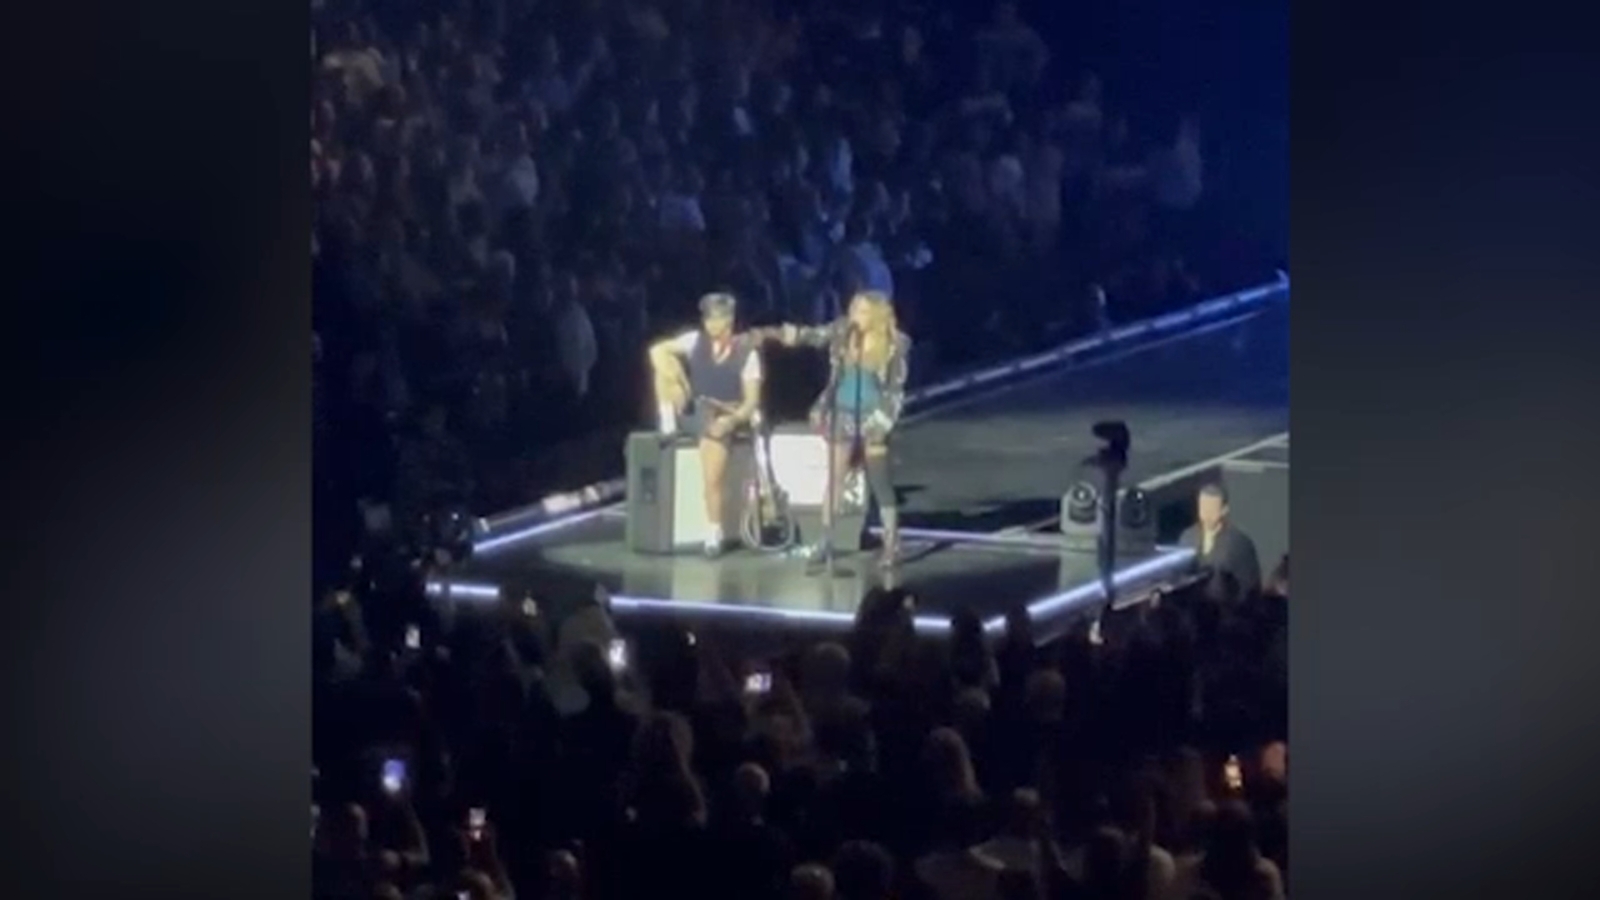 Madonna Calls Out Wheelchair-Bound Fan For Sitting Down During Concert: ‘Sorry About That’